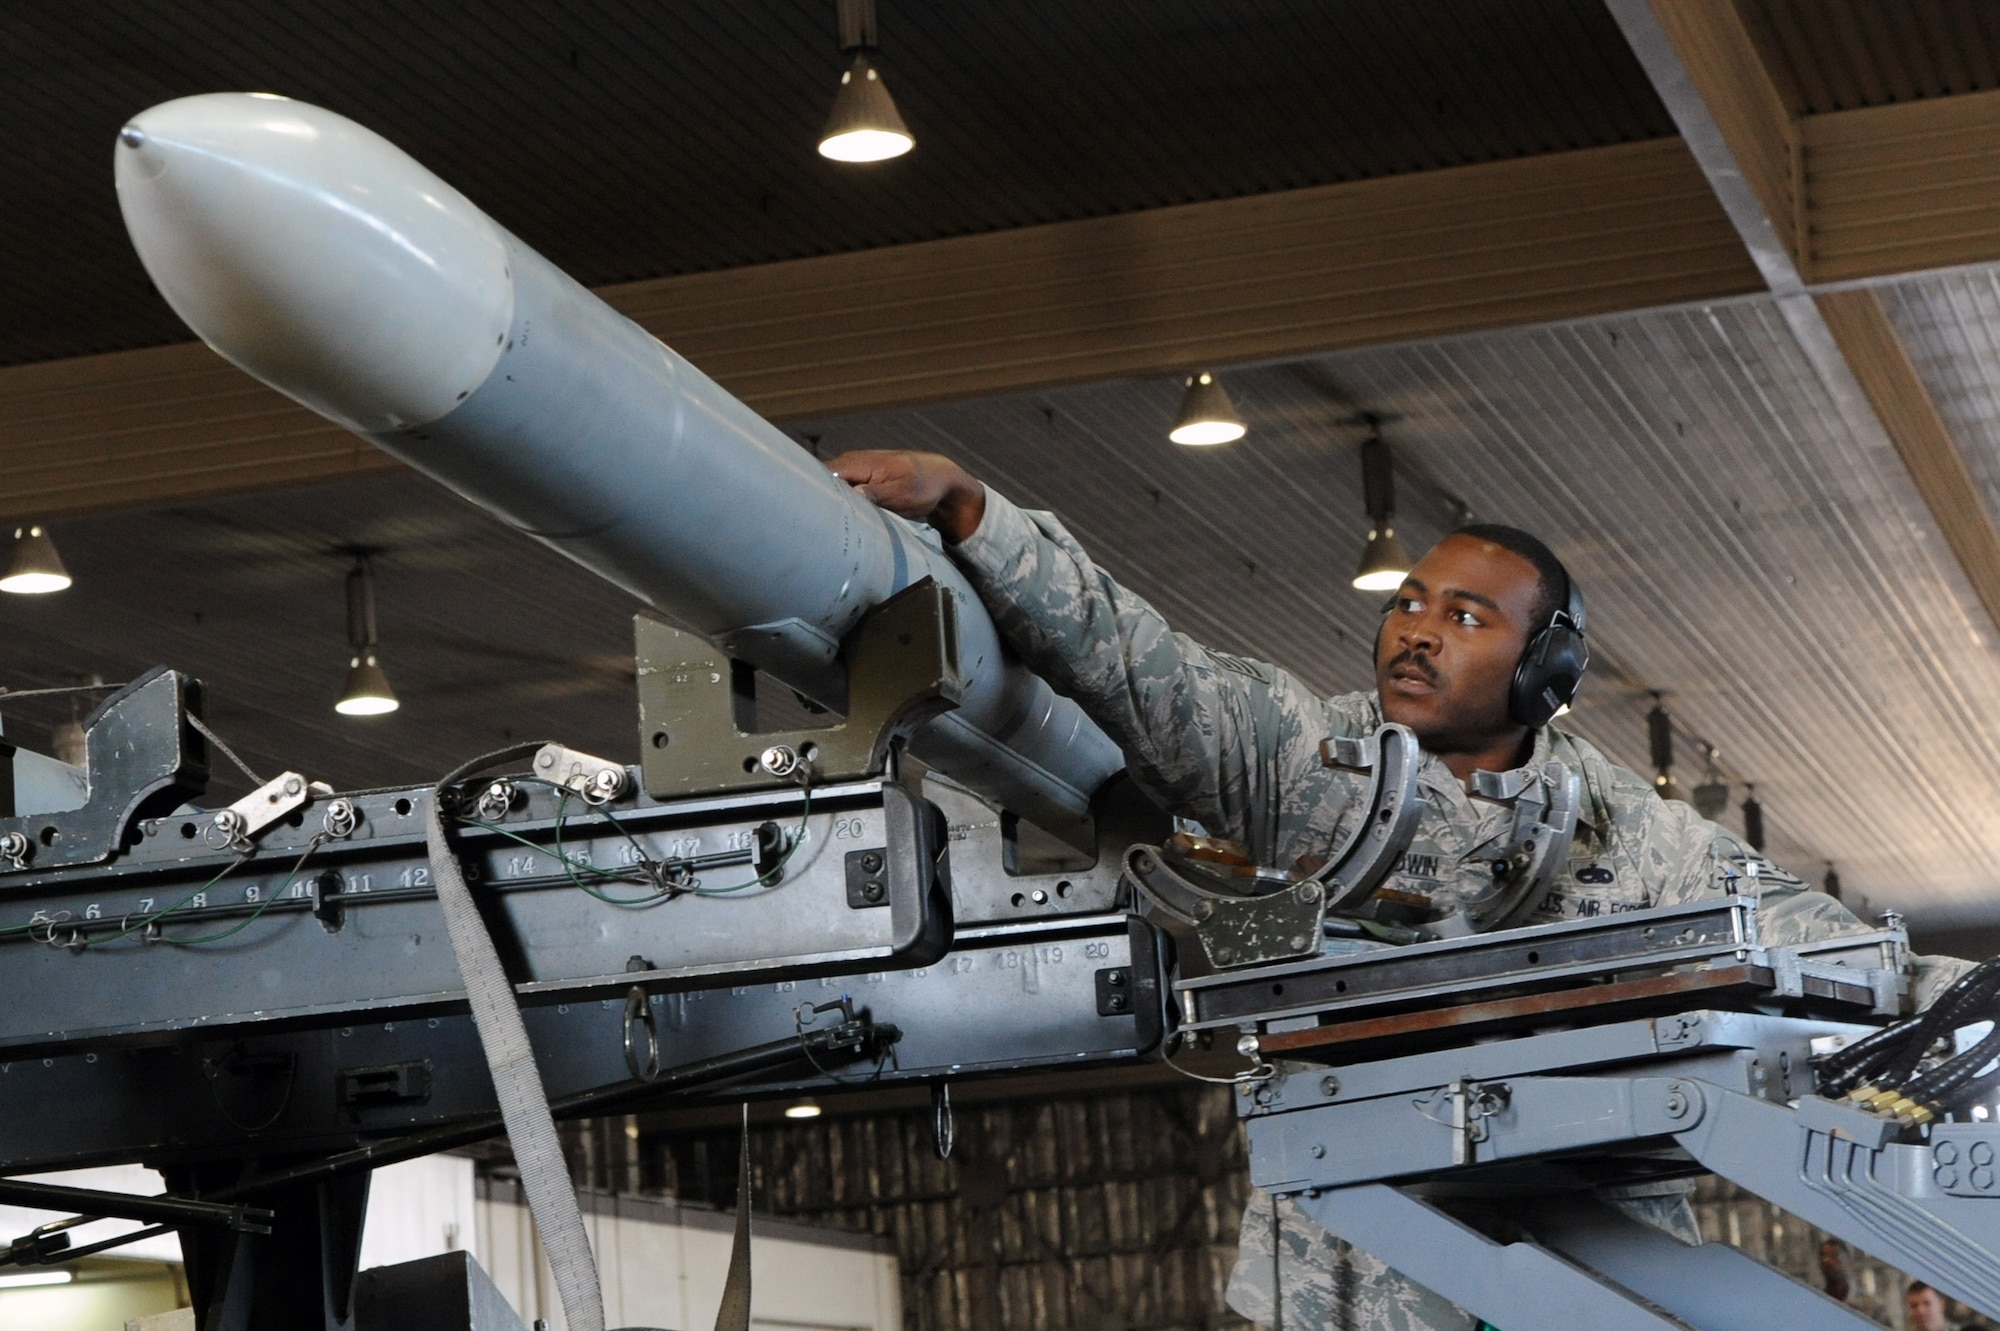 U.S. Air Force Staff Sgt. Ryan Baldwin, 13th Aircraft Maintenance Unit weapons load team chief, unloads an AIM-120 Advanced Medium-Range Air-to-air Missile to be put on an F-16 Fighting Falcon during the Load Crew of the Quarter competition at Misawa Air Base, Japan, Oct. 18, 2013. The three-man crew teams loaded an AGM-88 High-speed Anti-radiation Missile, an AIM-120 AMRAAM, and an AIM-9 Sidewinder, a short-range air-to-air missile. (U. S. Air Force photo by Senior Airman Derek VanHorn)